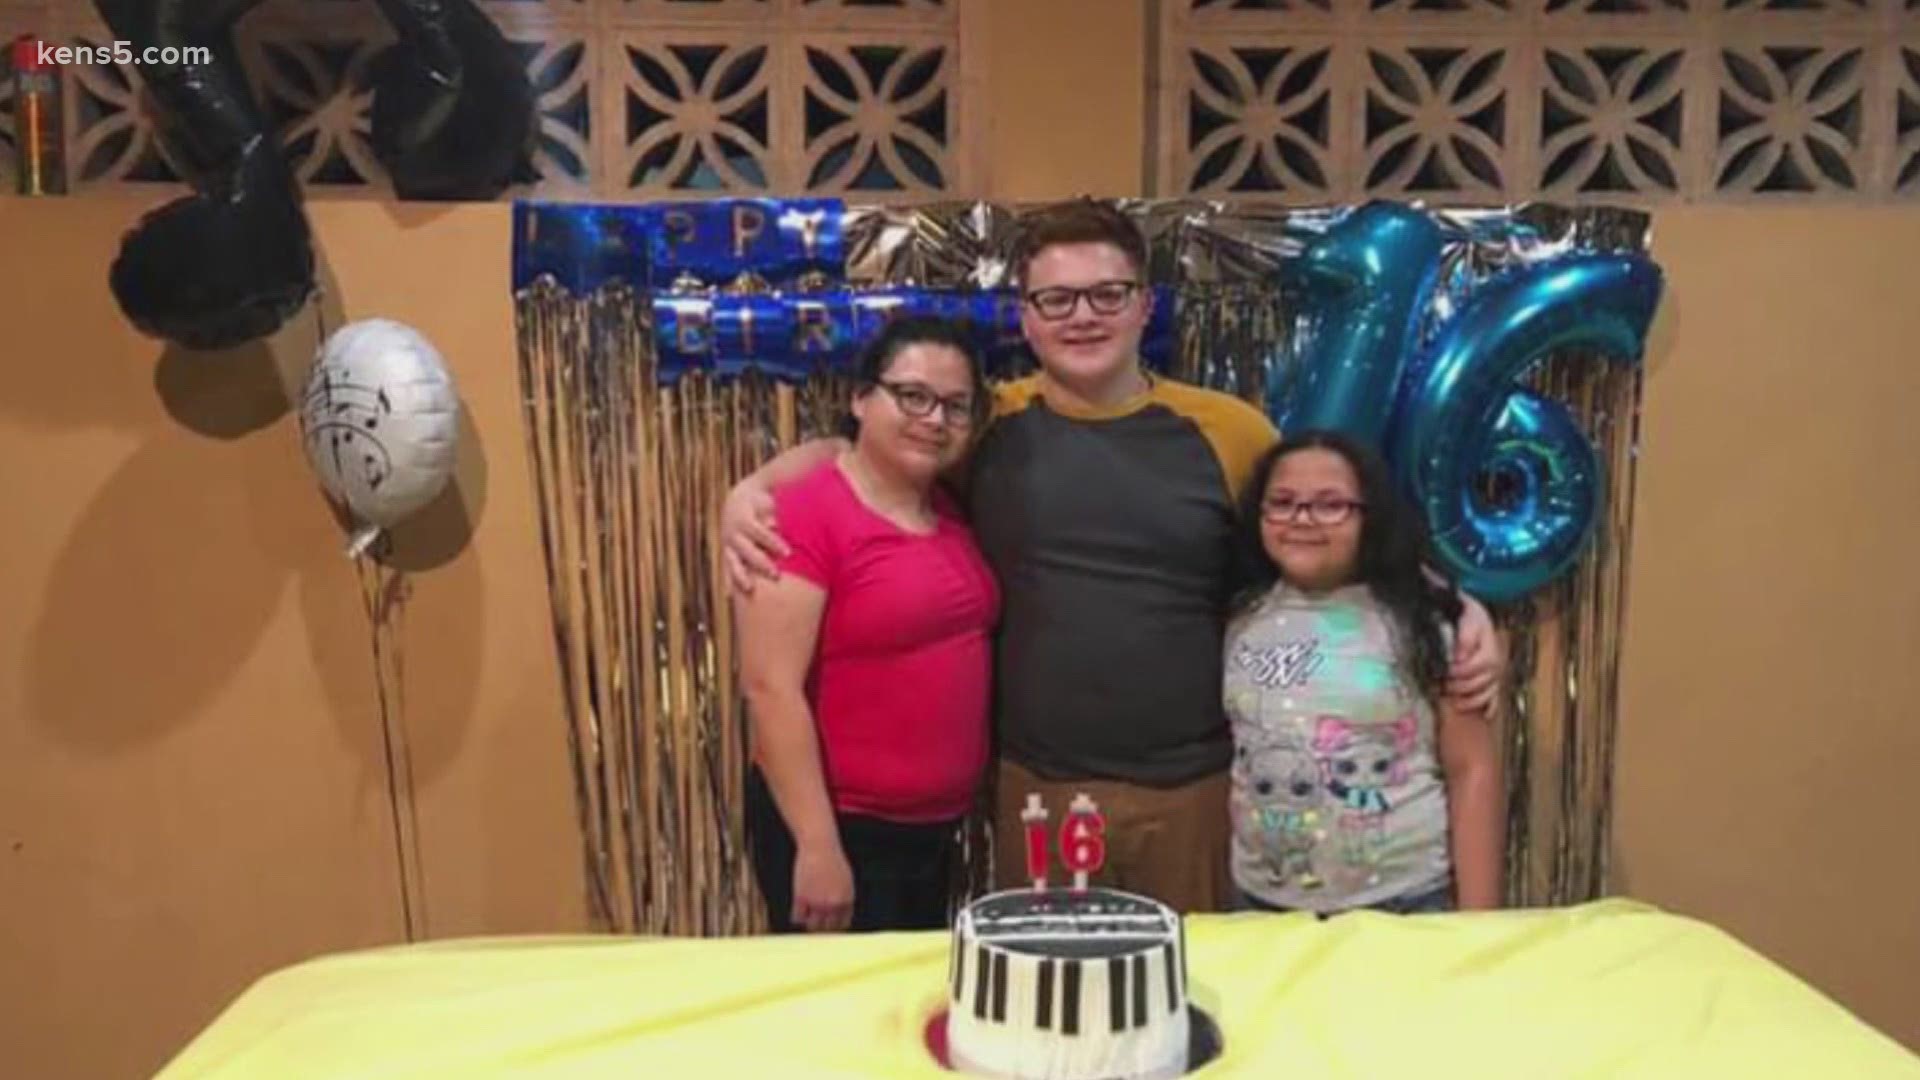 A 39-year-old mother, along with her teen son and 9-year-old daughter, was last seen in Mexico on June 13.